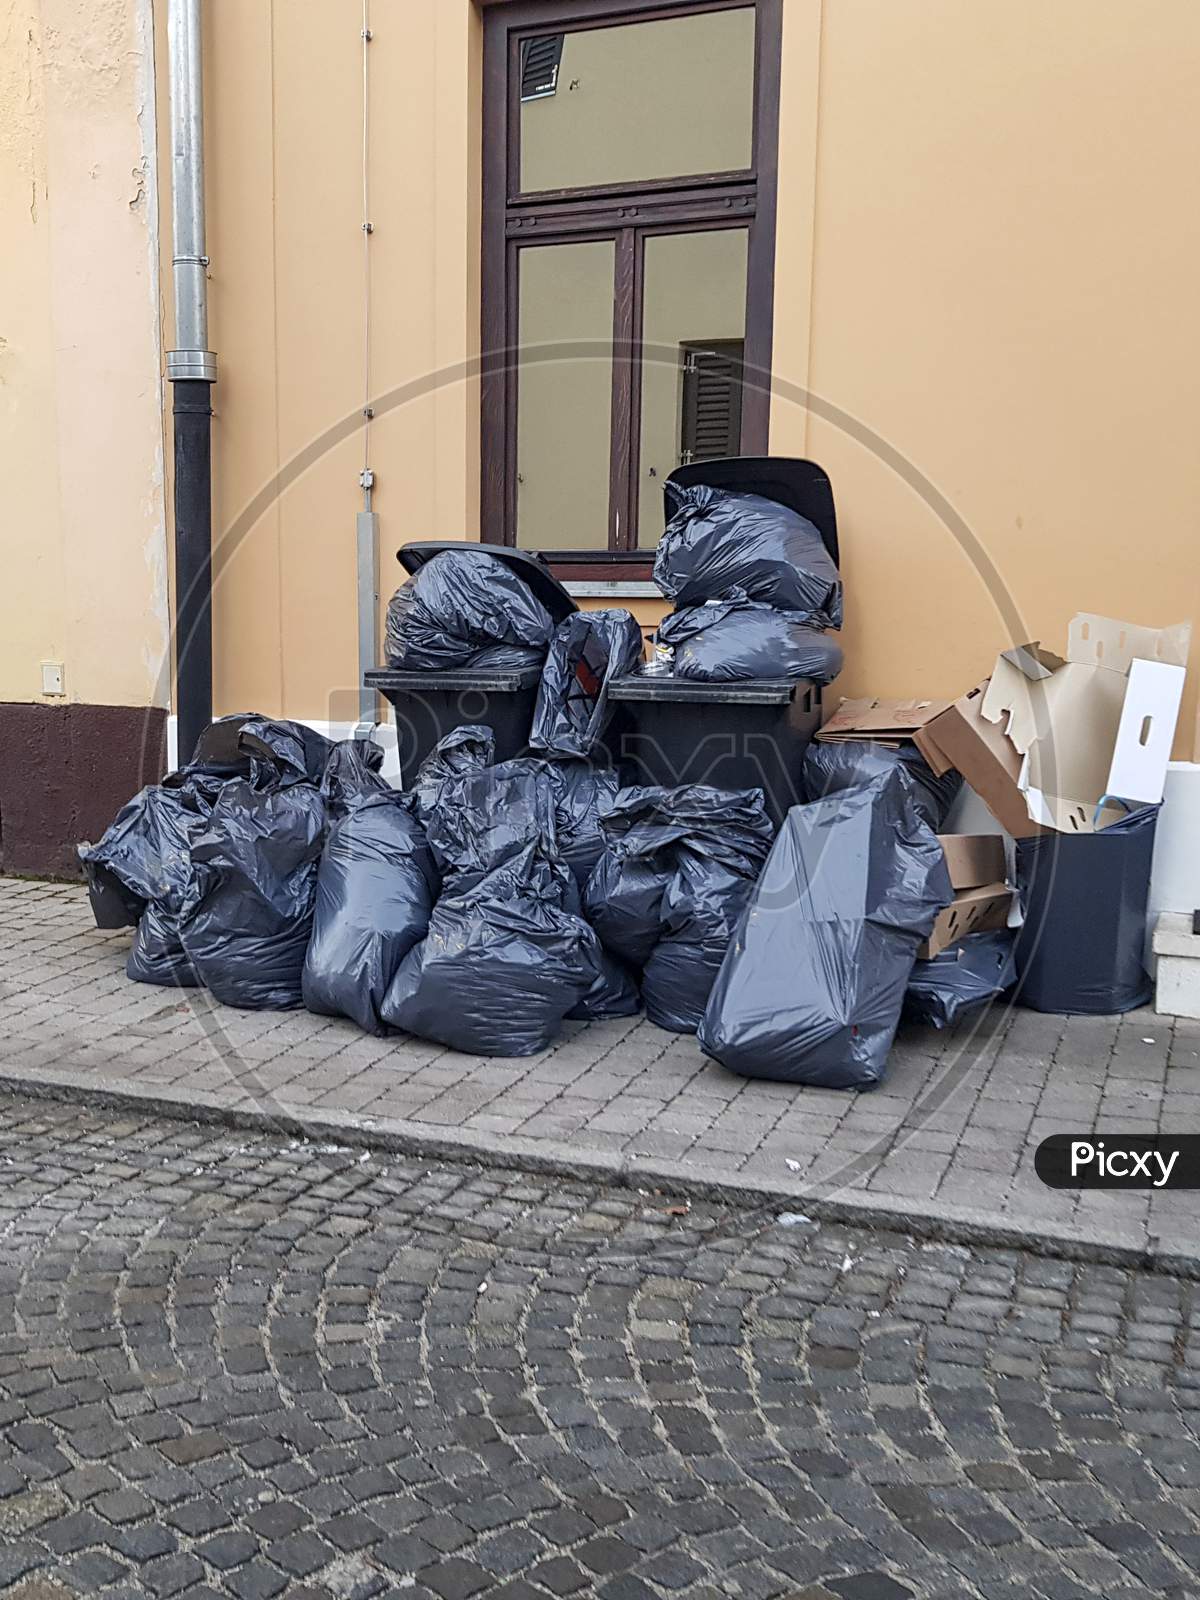 A Pile Of Sorted Garbage On The Street